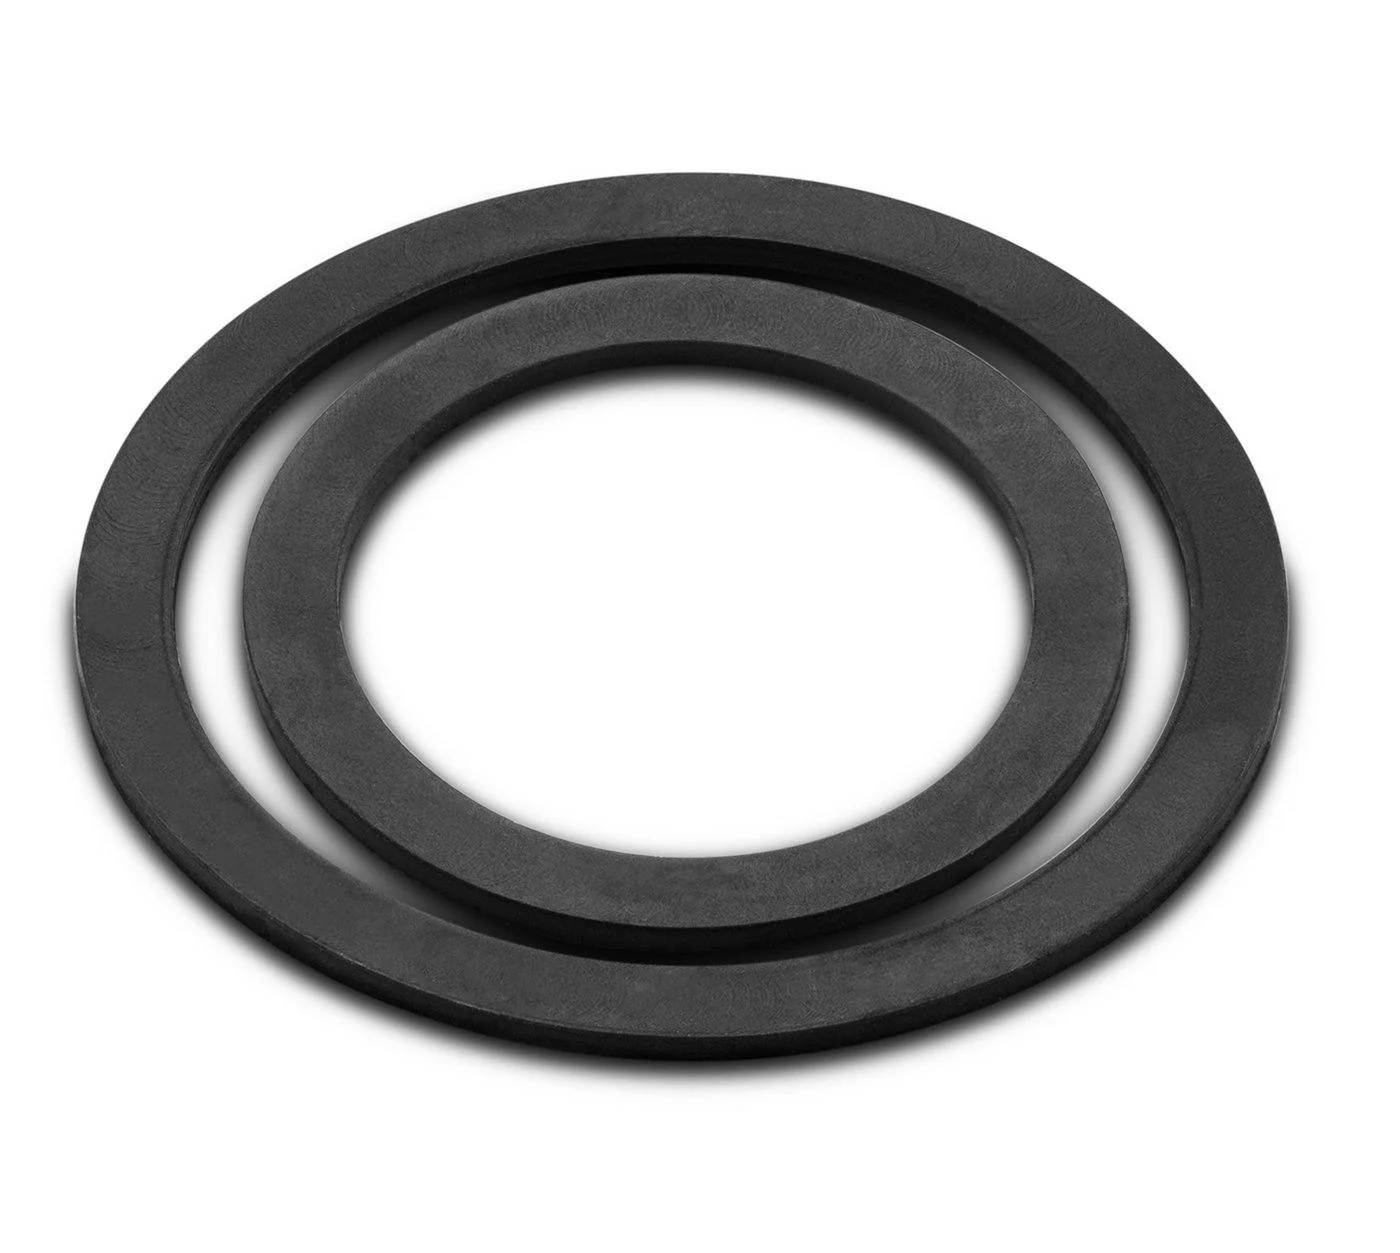 Replacement Gasket for Borosilicate Tri-Clamp Sight Glasses - Viton (FKM) Questions & Answers